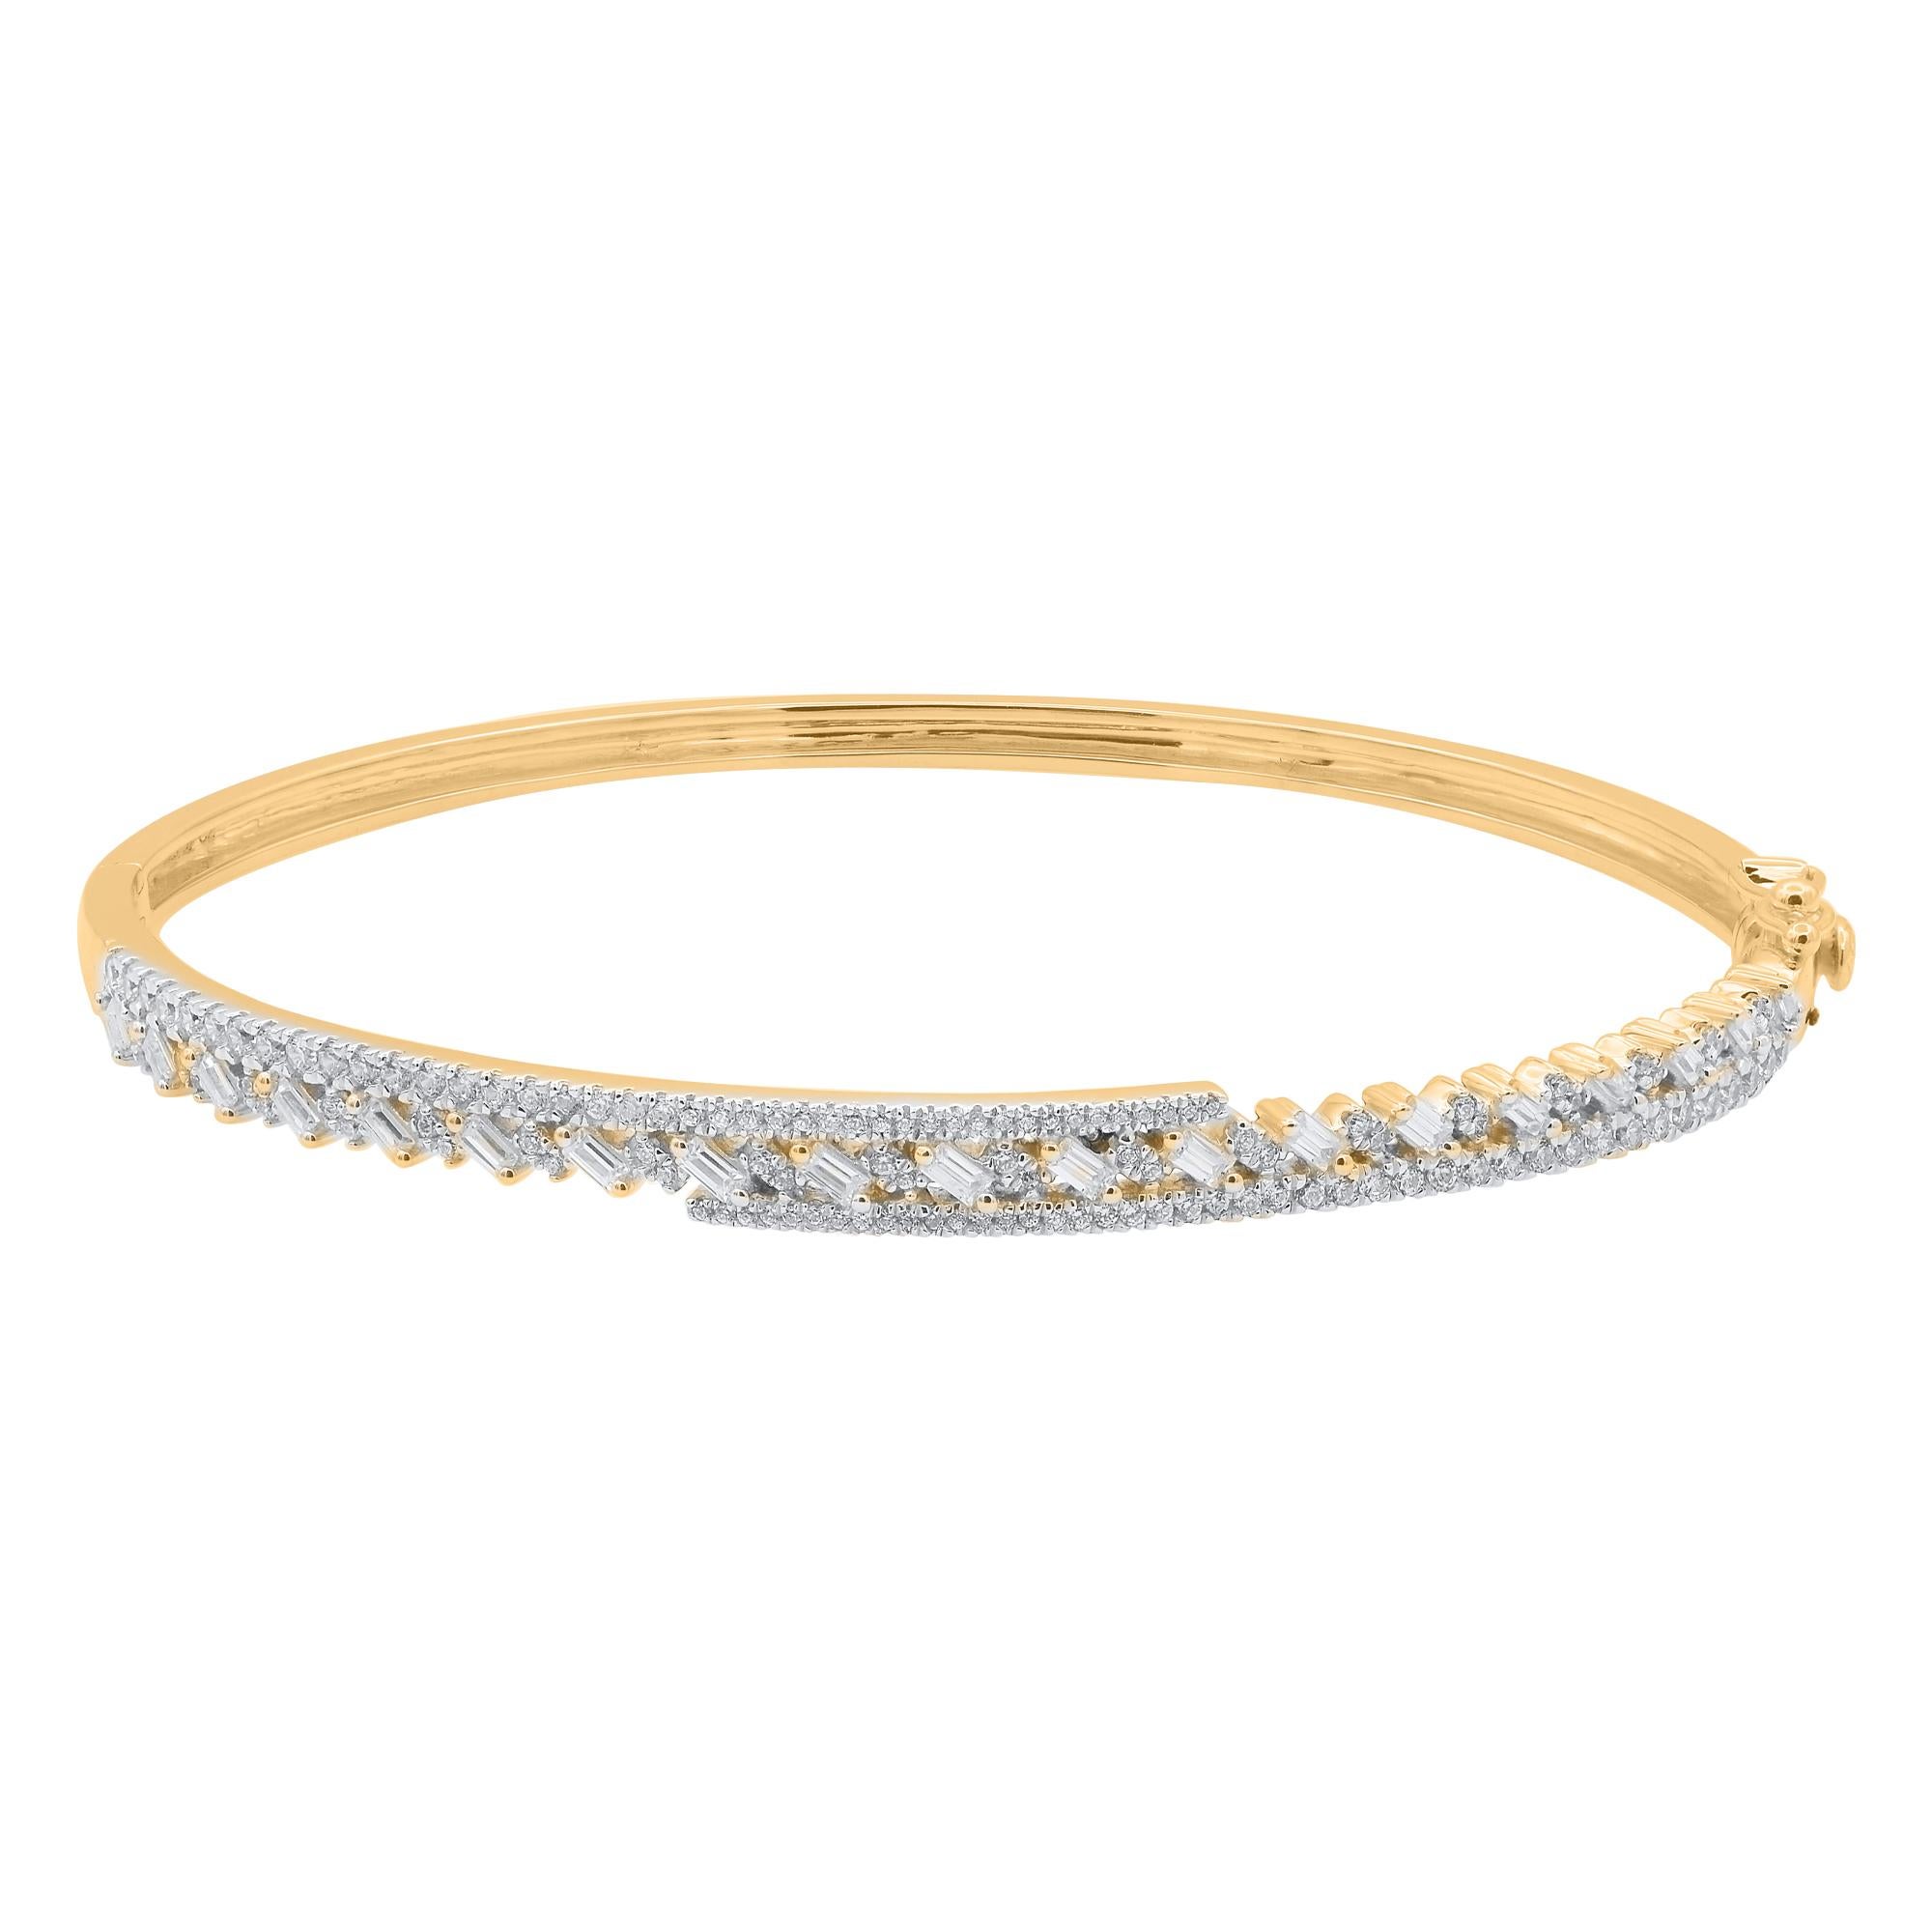 TJD 1.0 Ct Natural Round & Baguette Diamond Bangle Bracelet in 14KT Yellow Gold